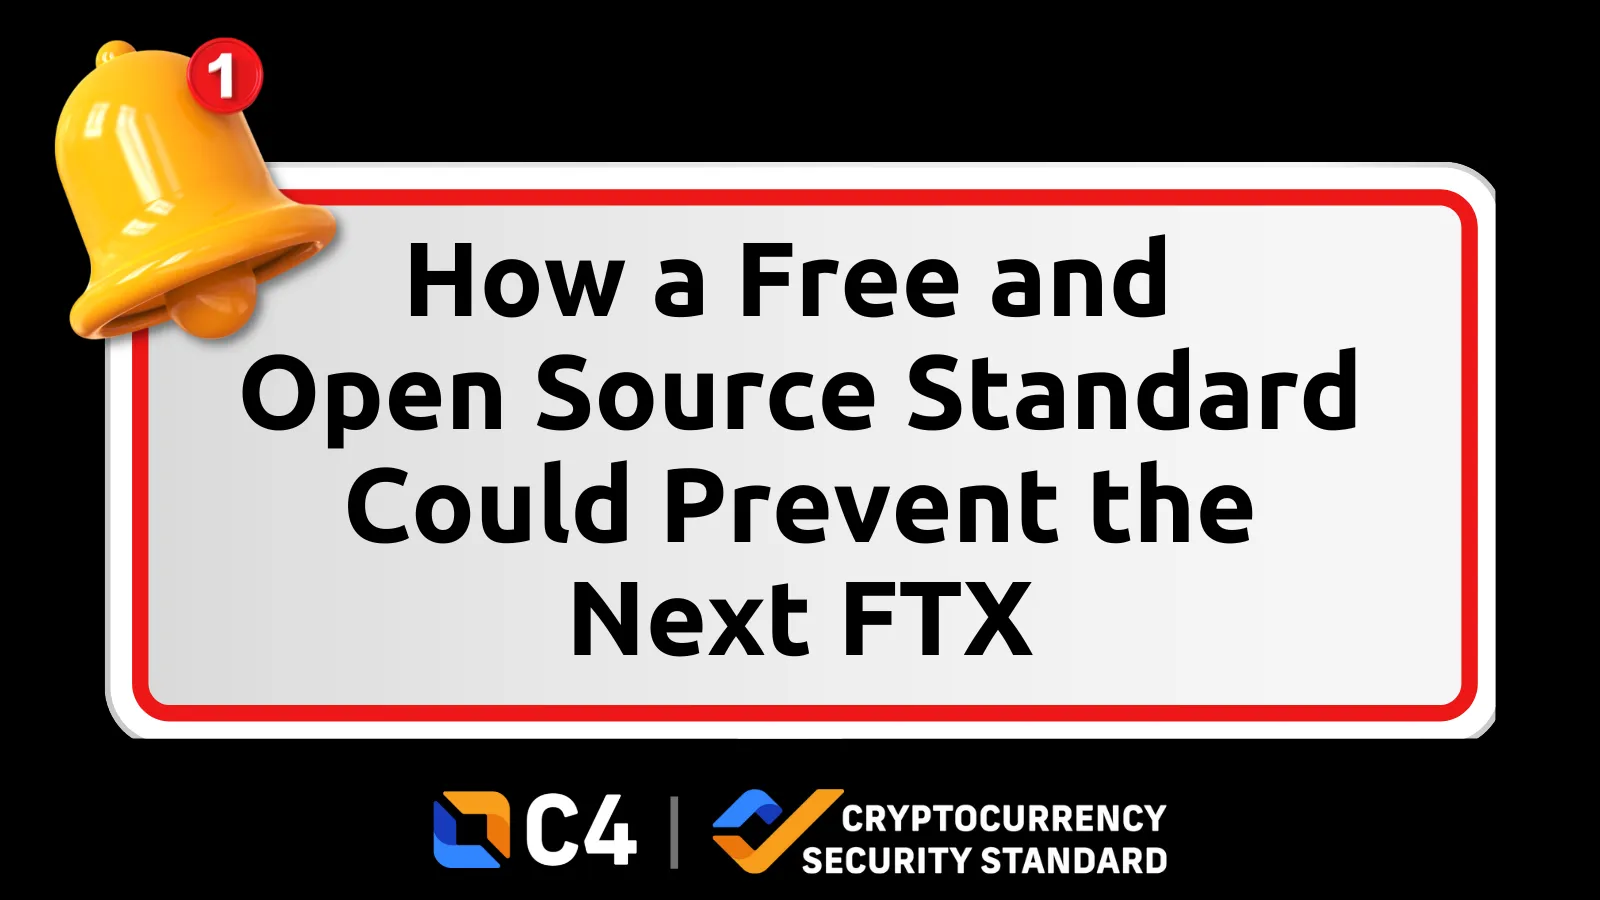 How a Free and Open Source Standard Could Prevent the Next FTX